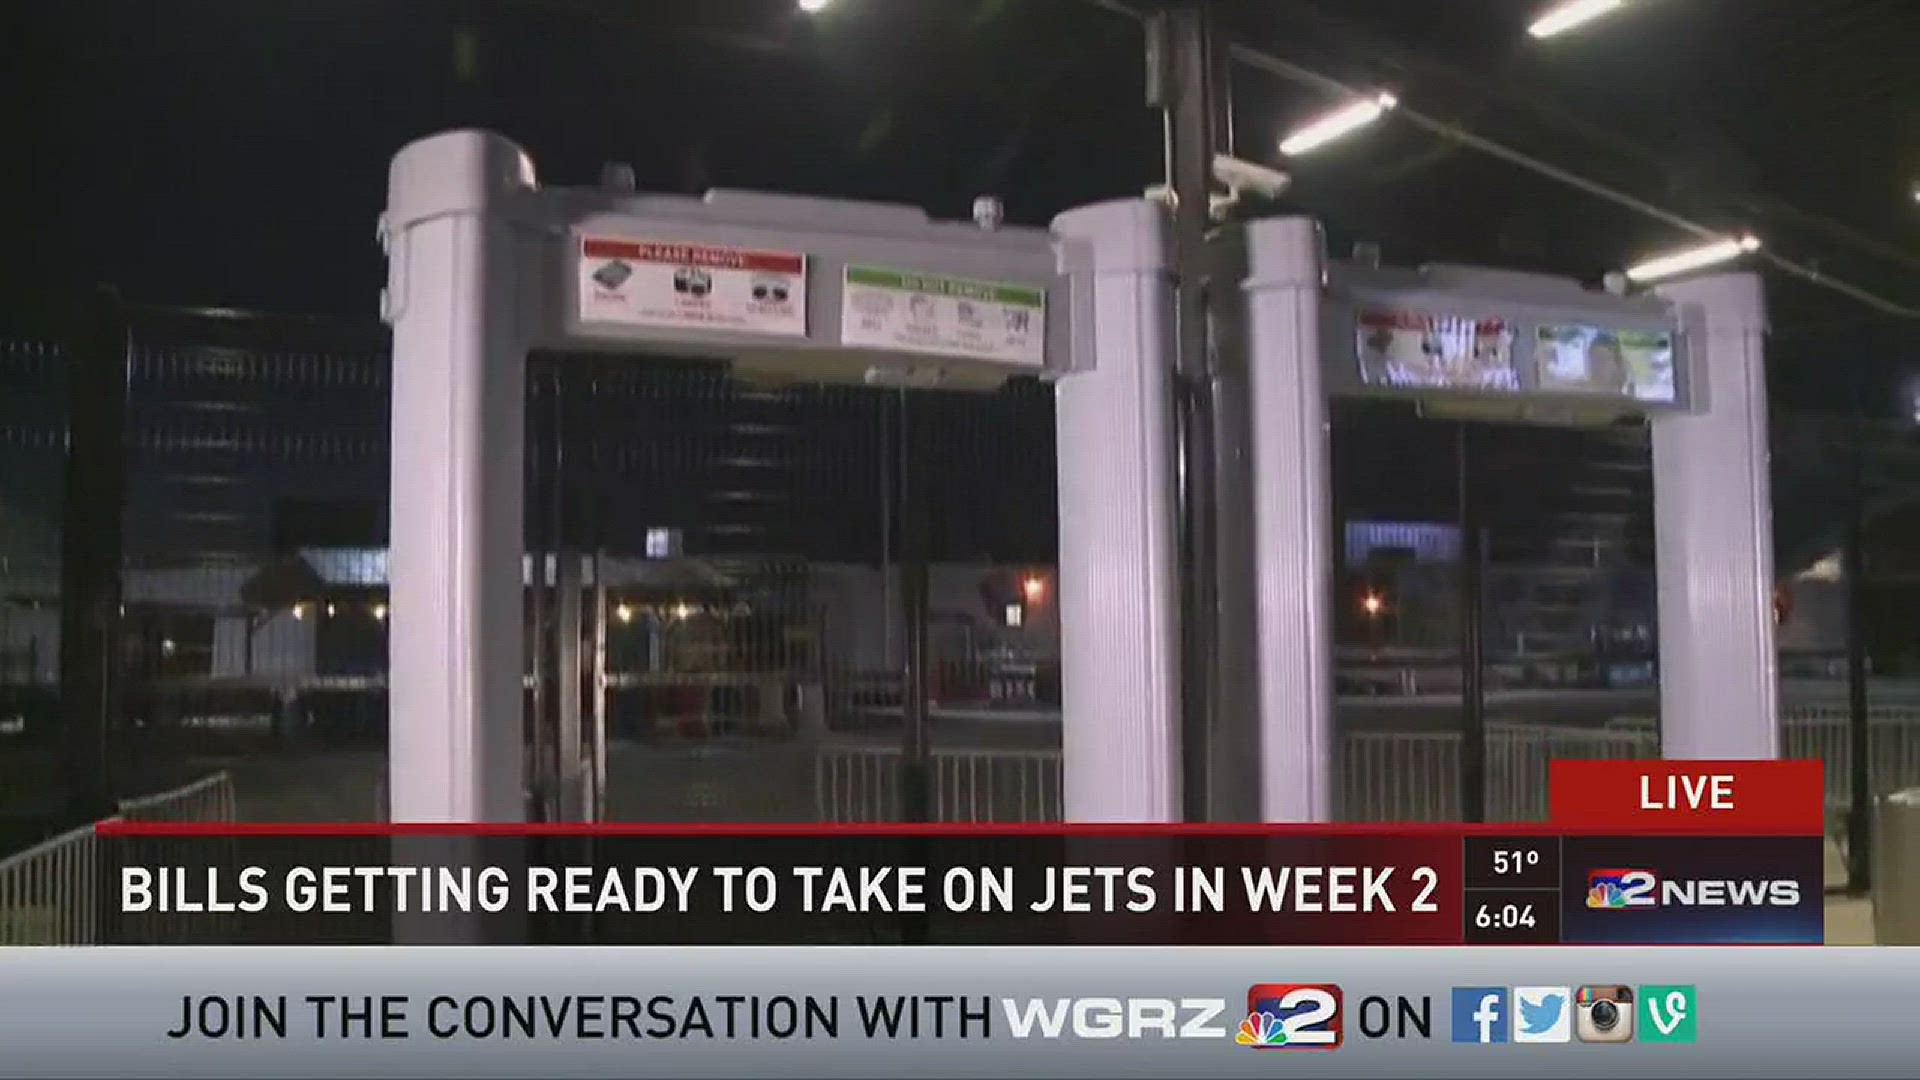 2 On Your Side's Pete Gallivan reports live from New Era Field as tailgaters and security gets ready for the Bills first home game.